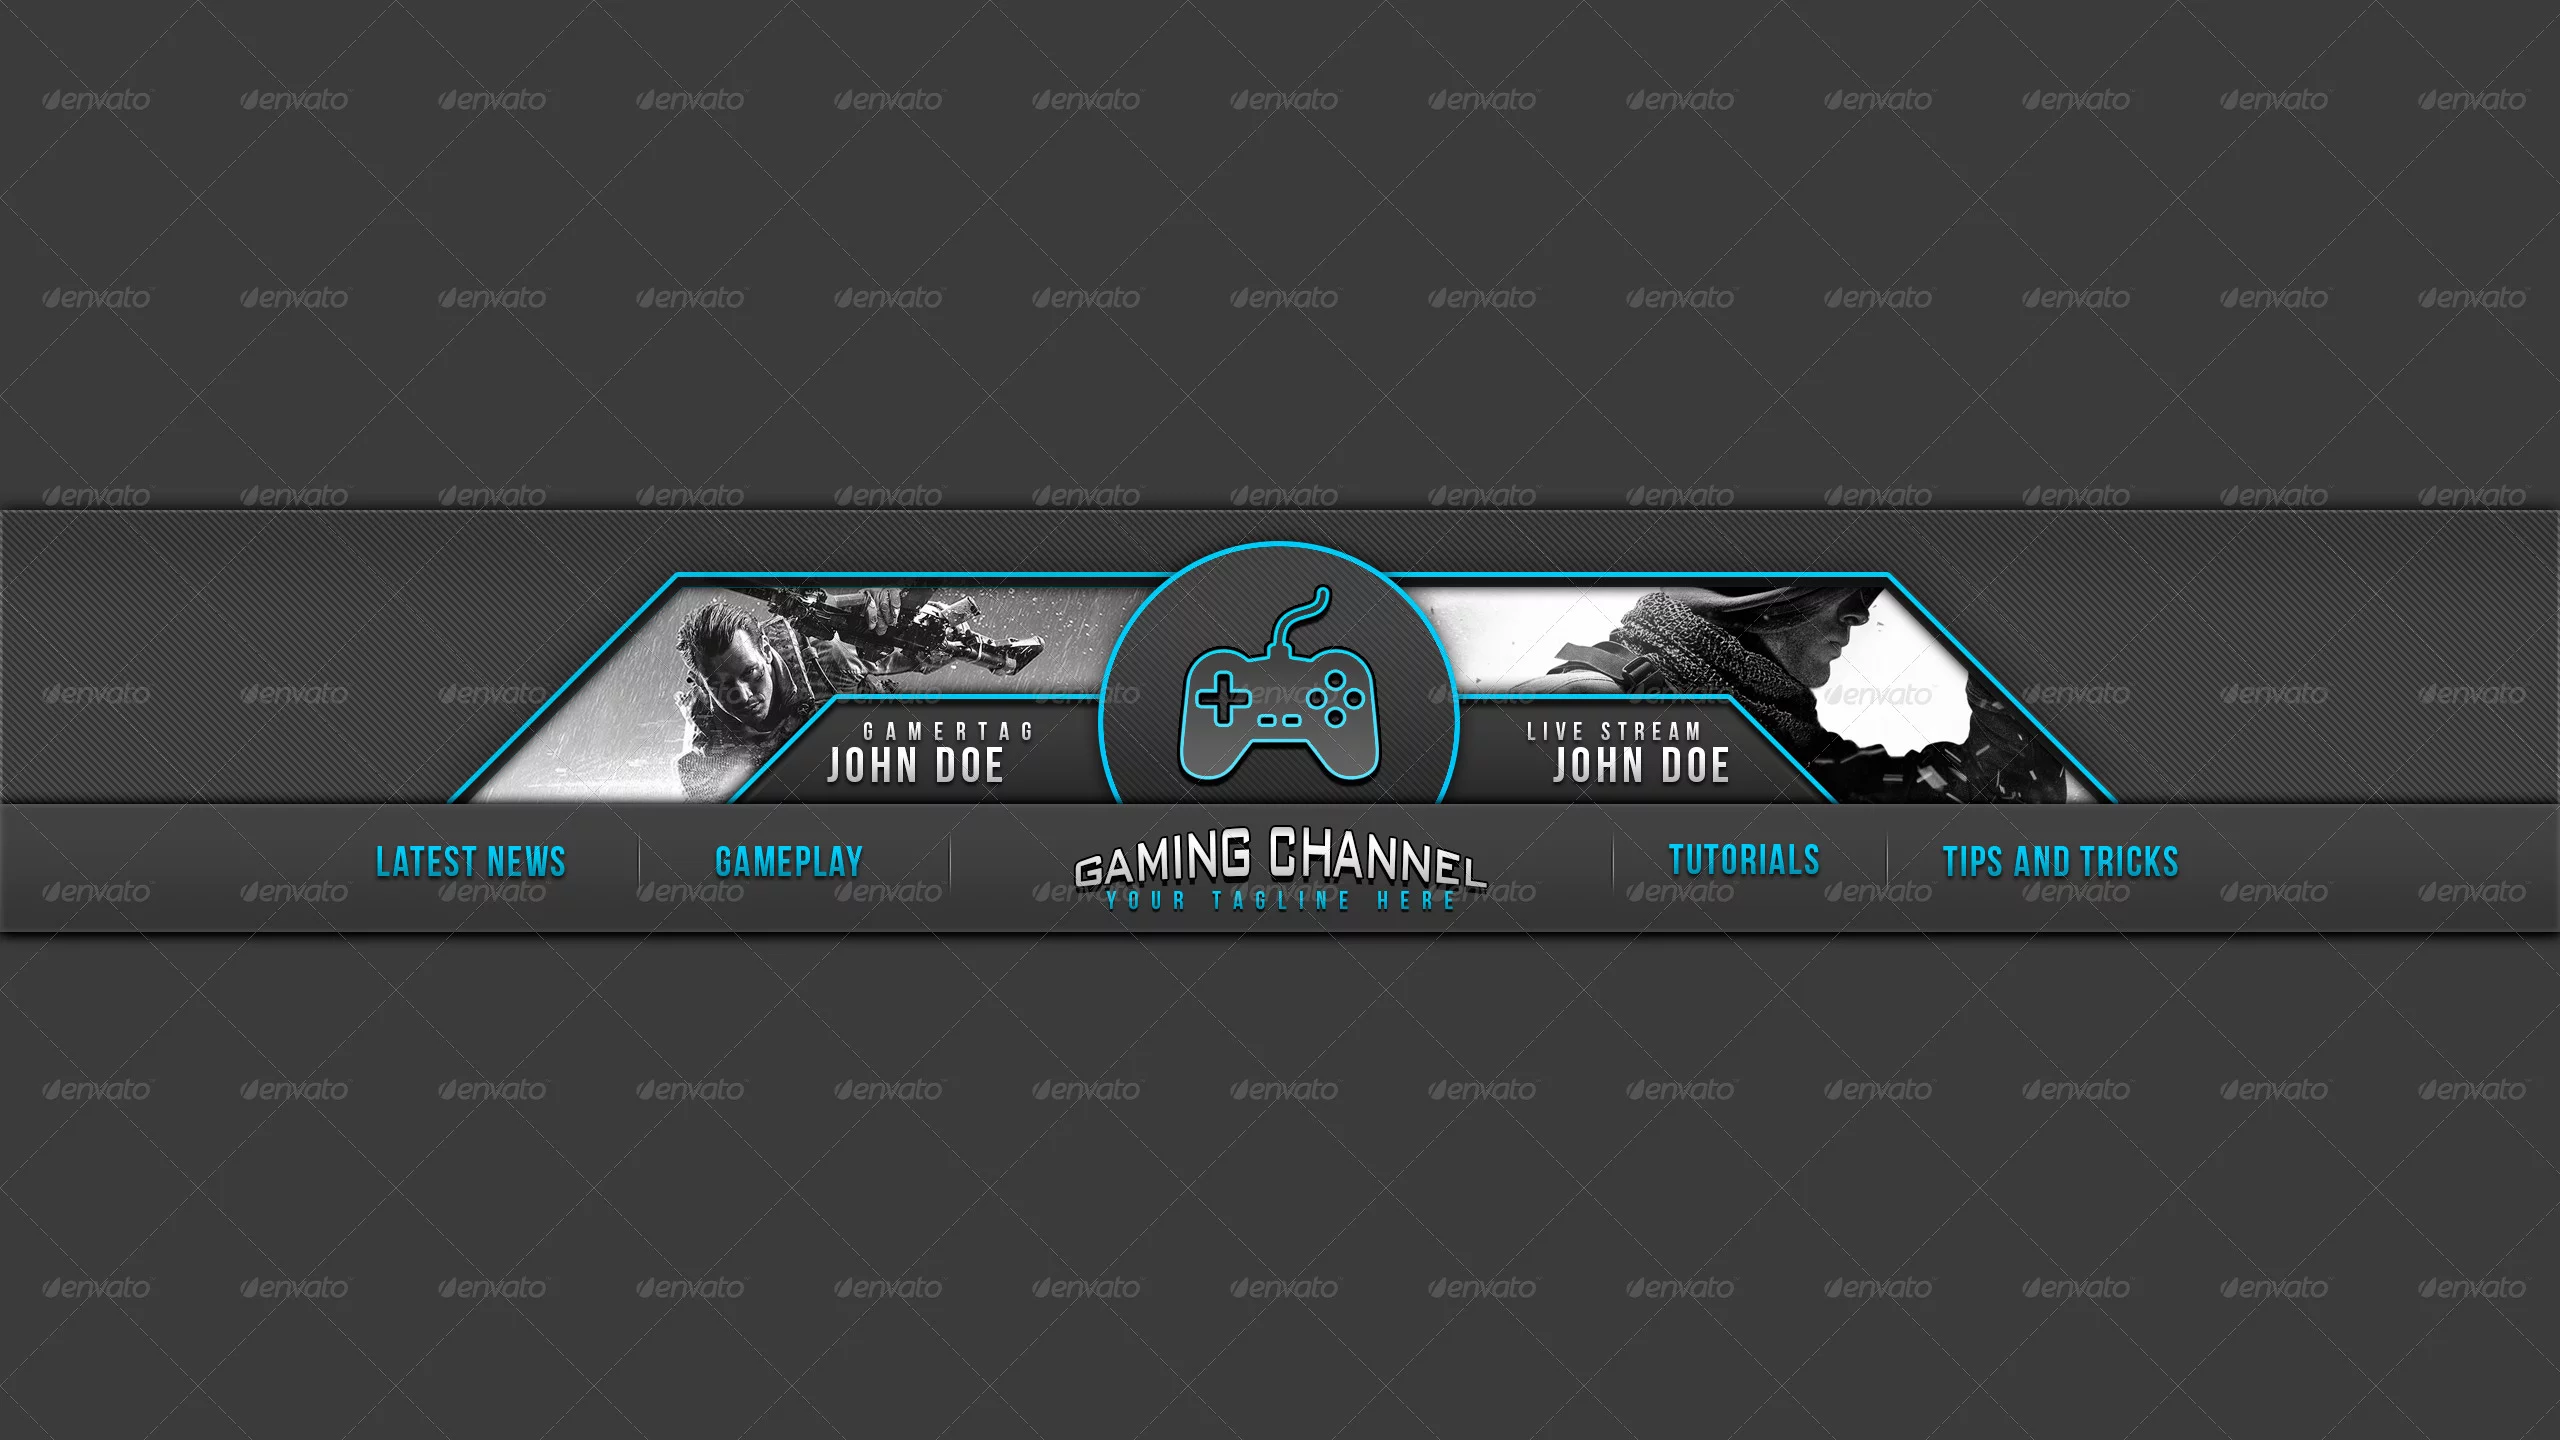 Photoshop: **FREE** HD Gaming  Banner Template PSD + Direct Download  [#7] 